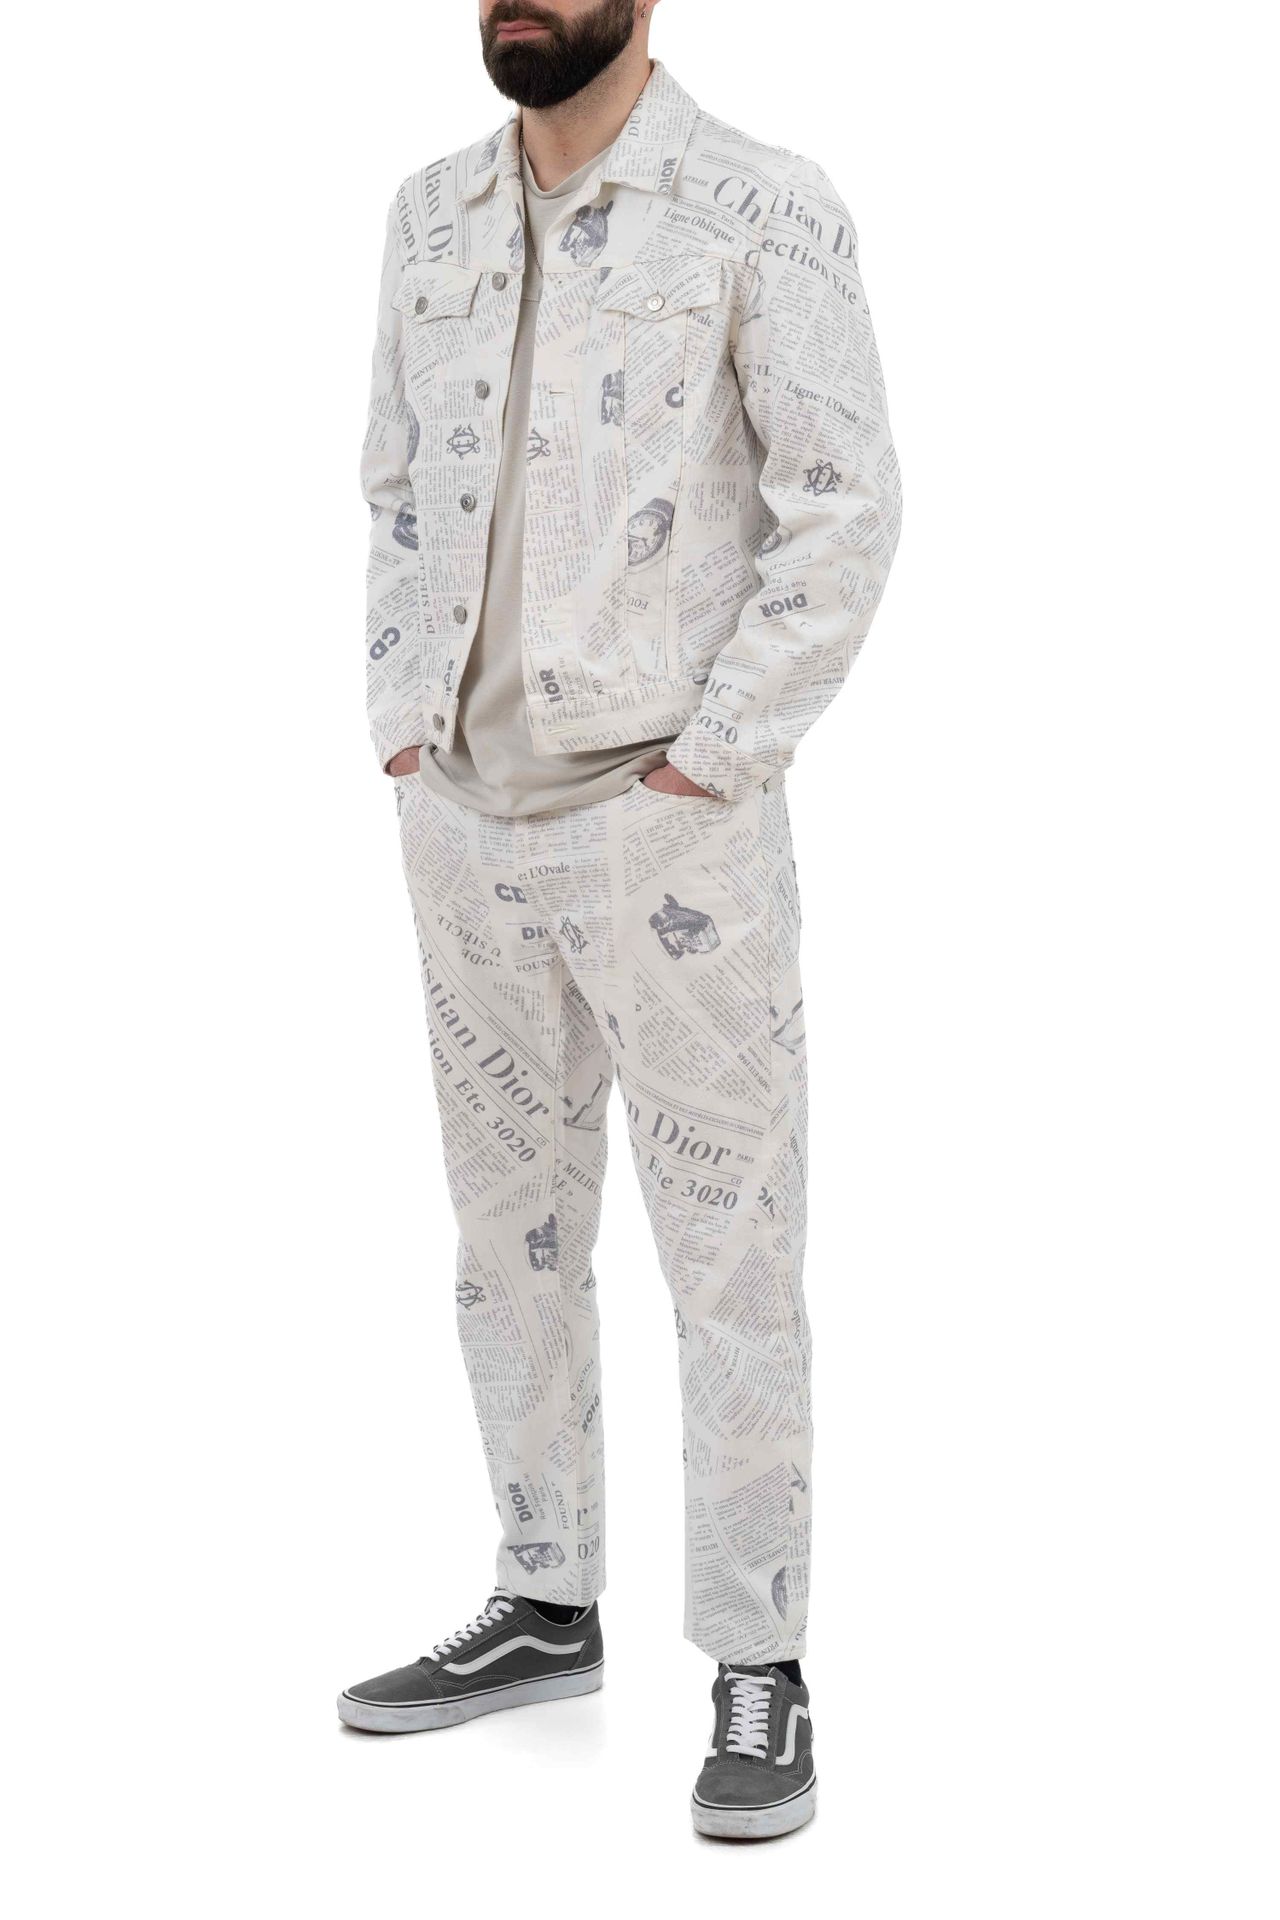 motto antenna detergent DIOR Men's outfit in white denim printed with a newspap… | MoniteurLive.com